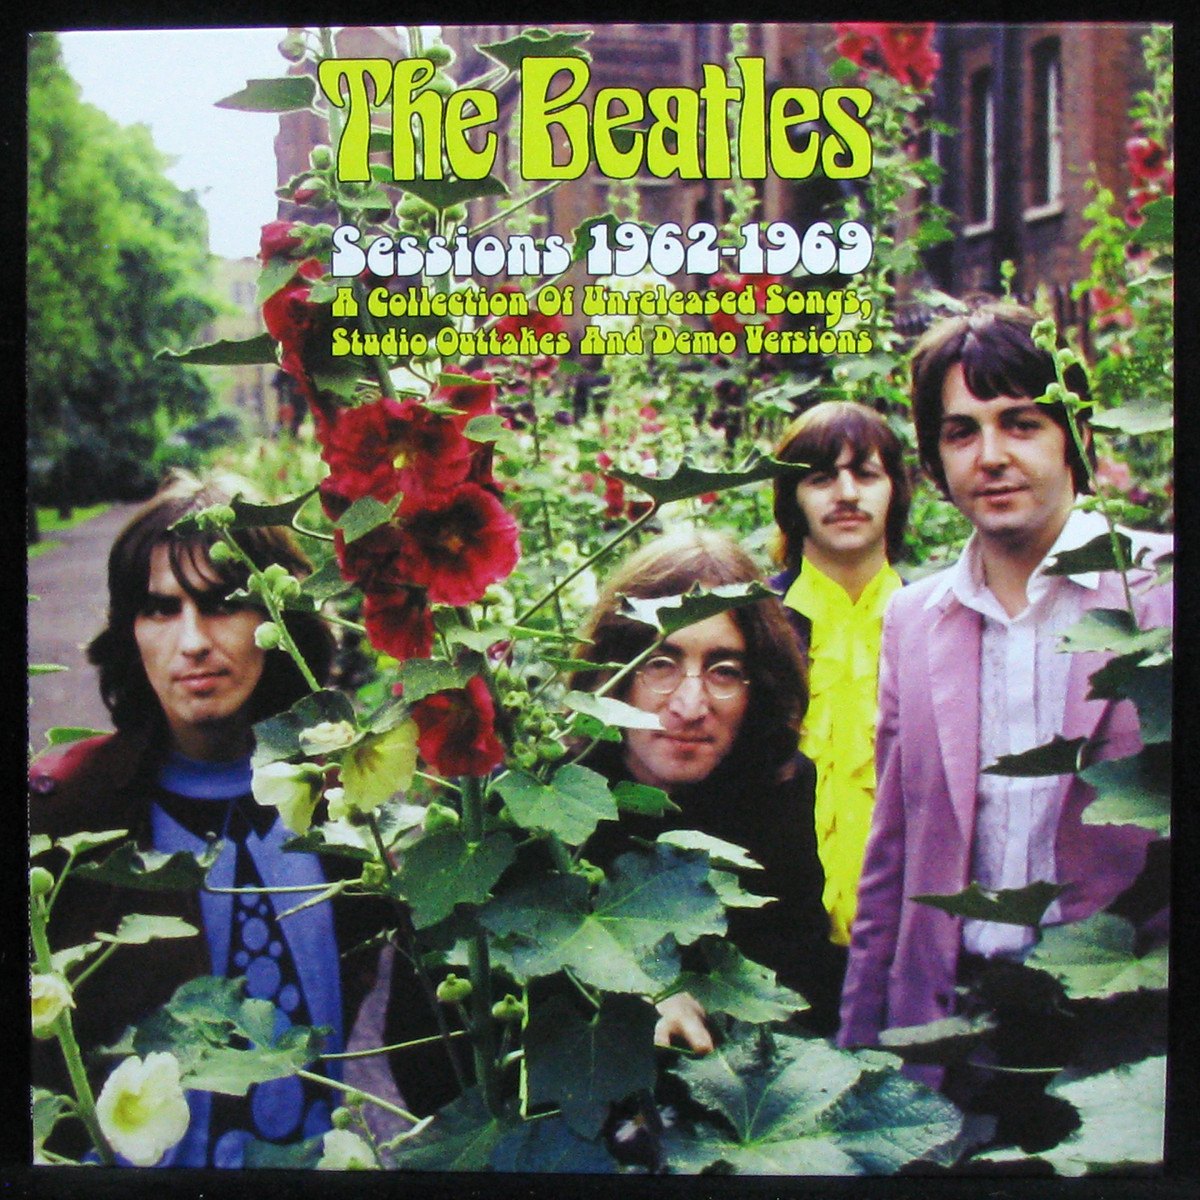 LP Beatles — Sessions 1962-1969 A Collection Of Unreleased Songs, Studio Outtakes And Demo Versions фото